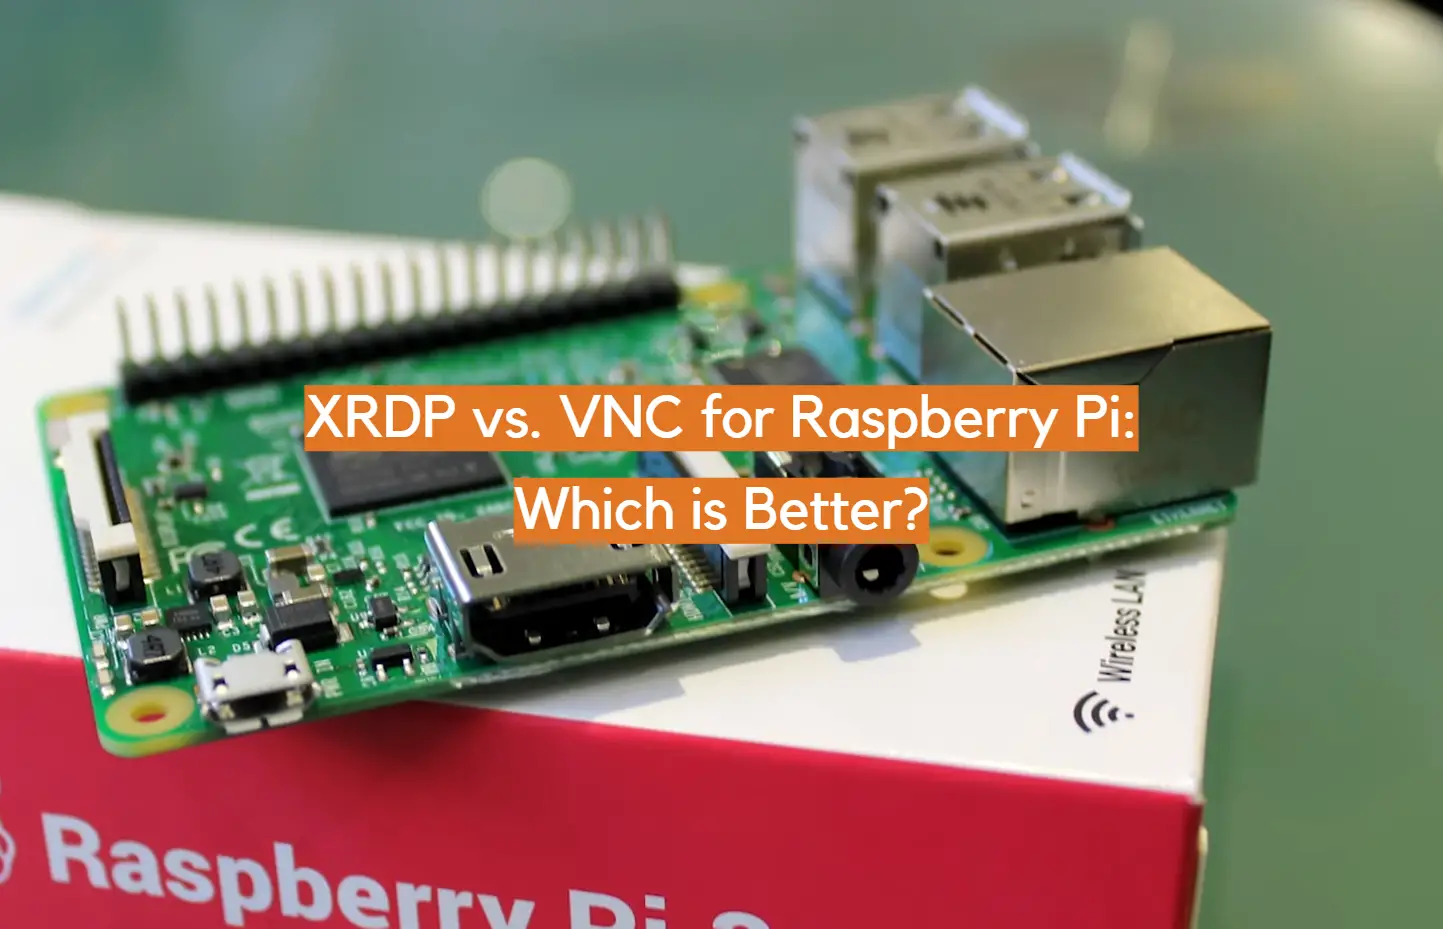 XRDP vs. VNC for Raspberry Pi: Which is Better?